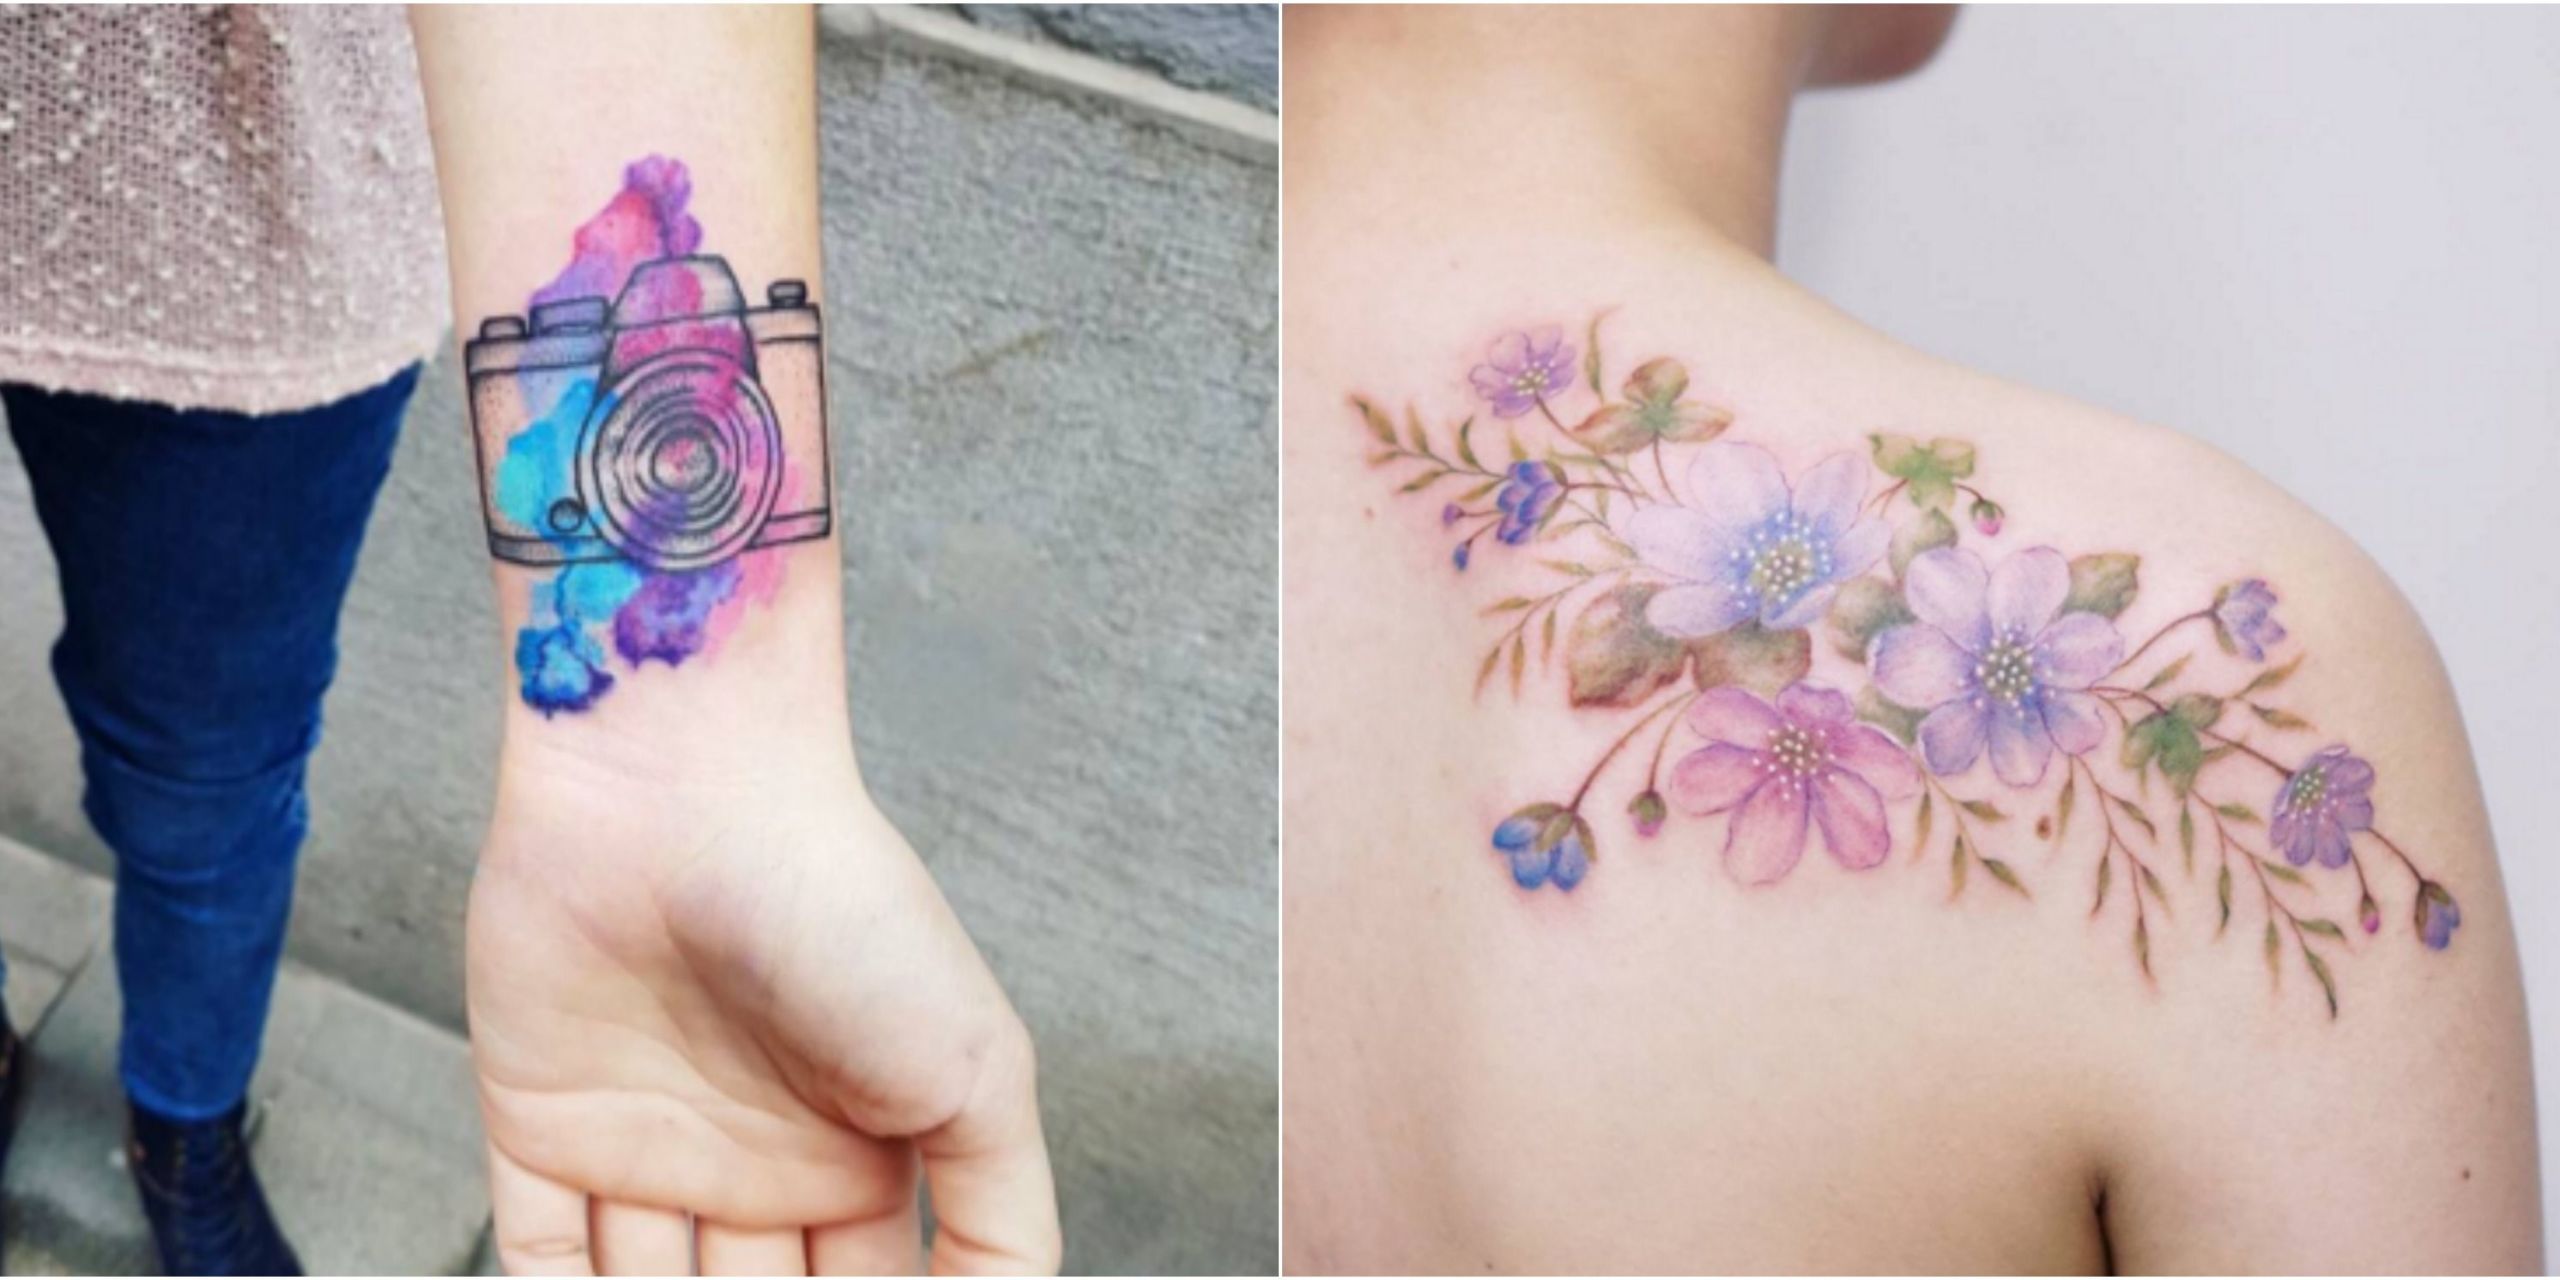 Tattoo Artist Annita Maslov Creates Beautiful Nature-Inspired Tattoos With  A Gothic Touch